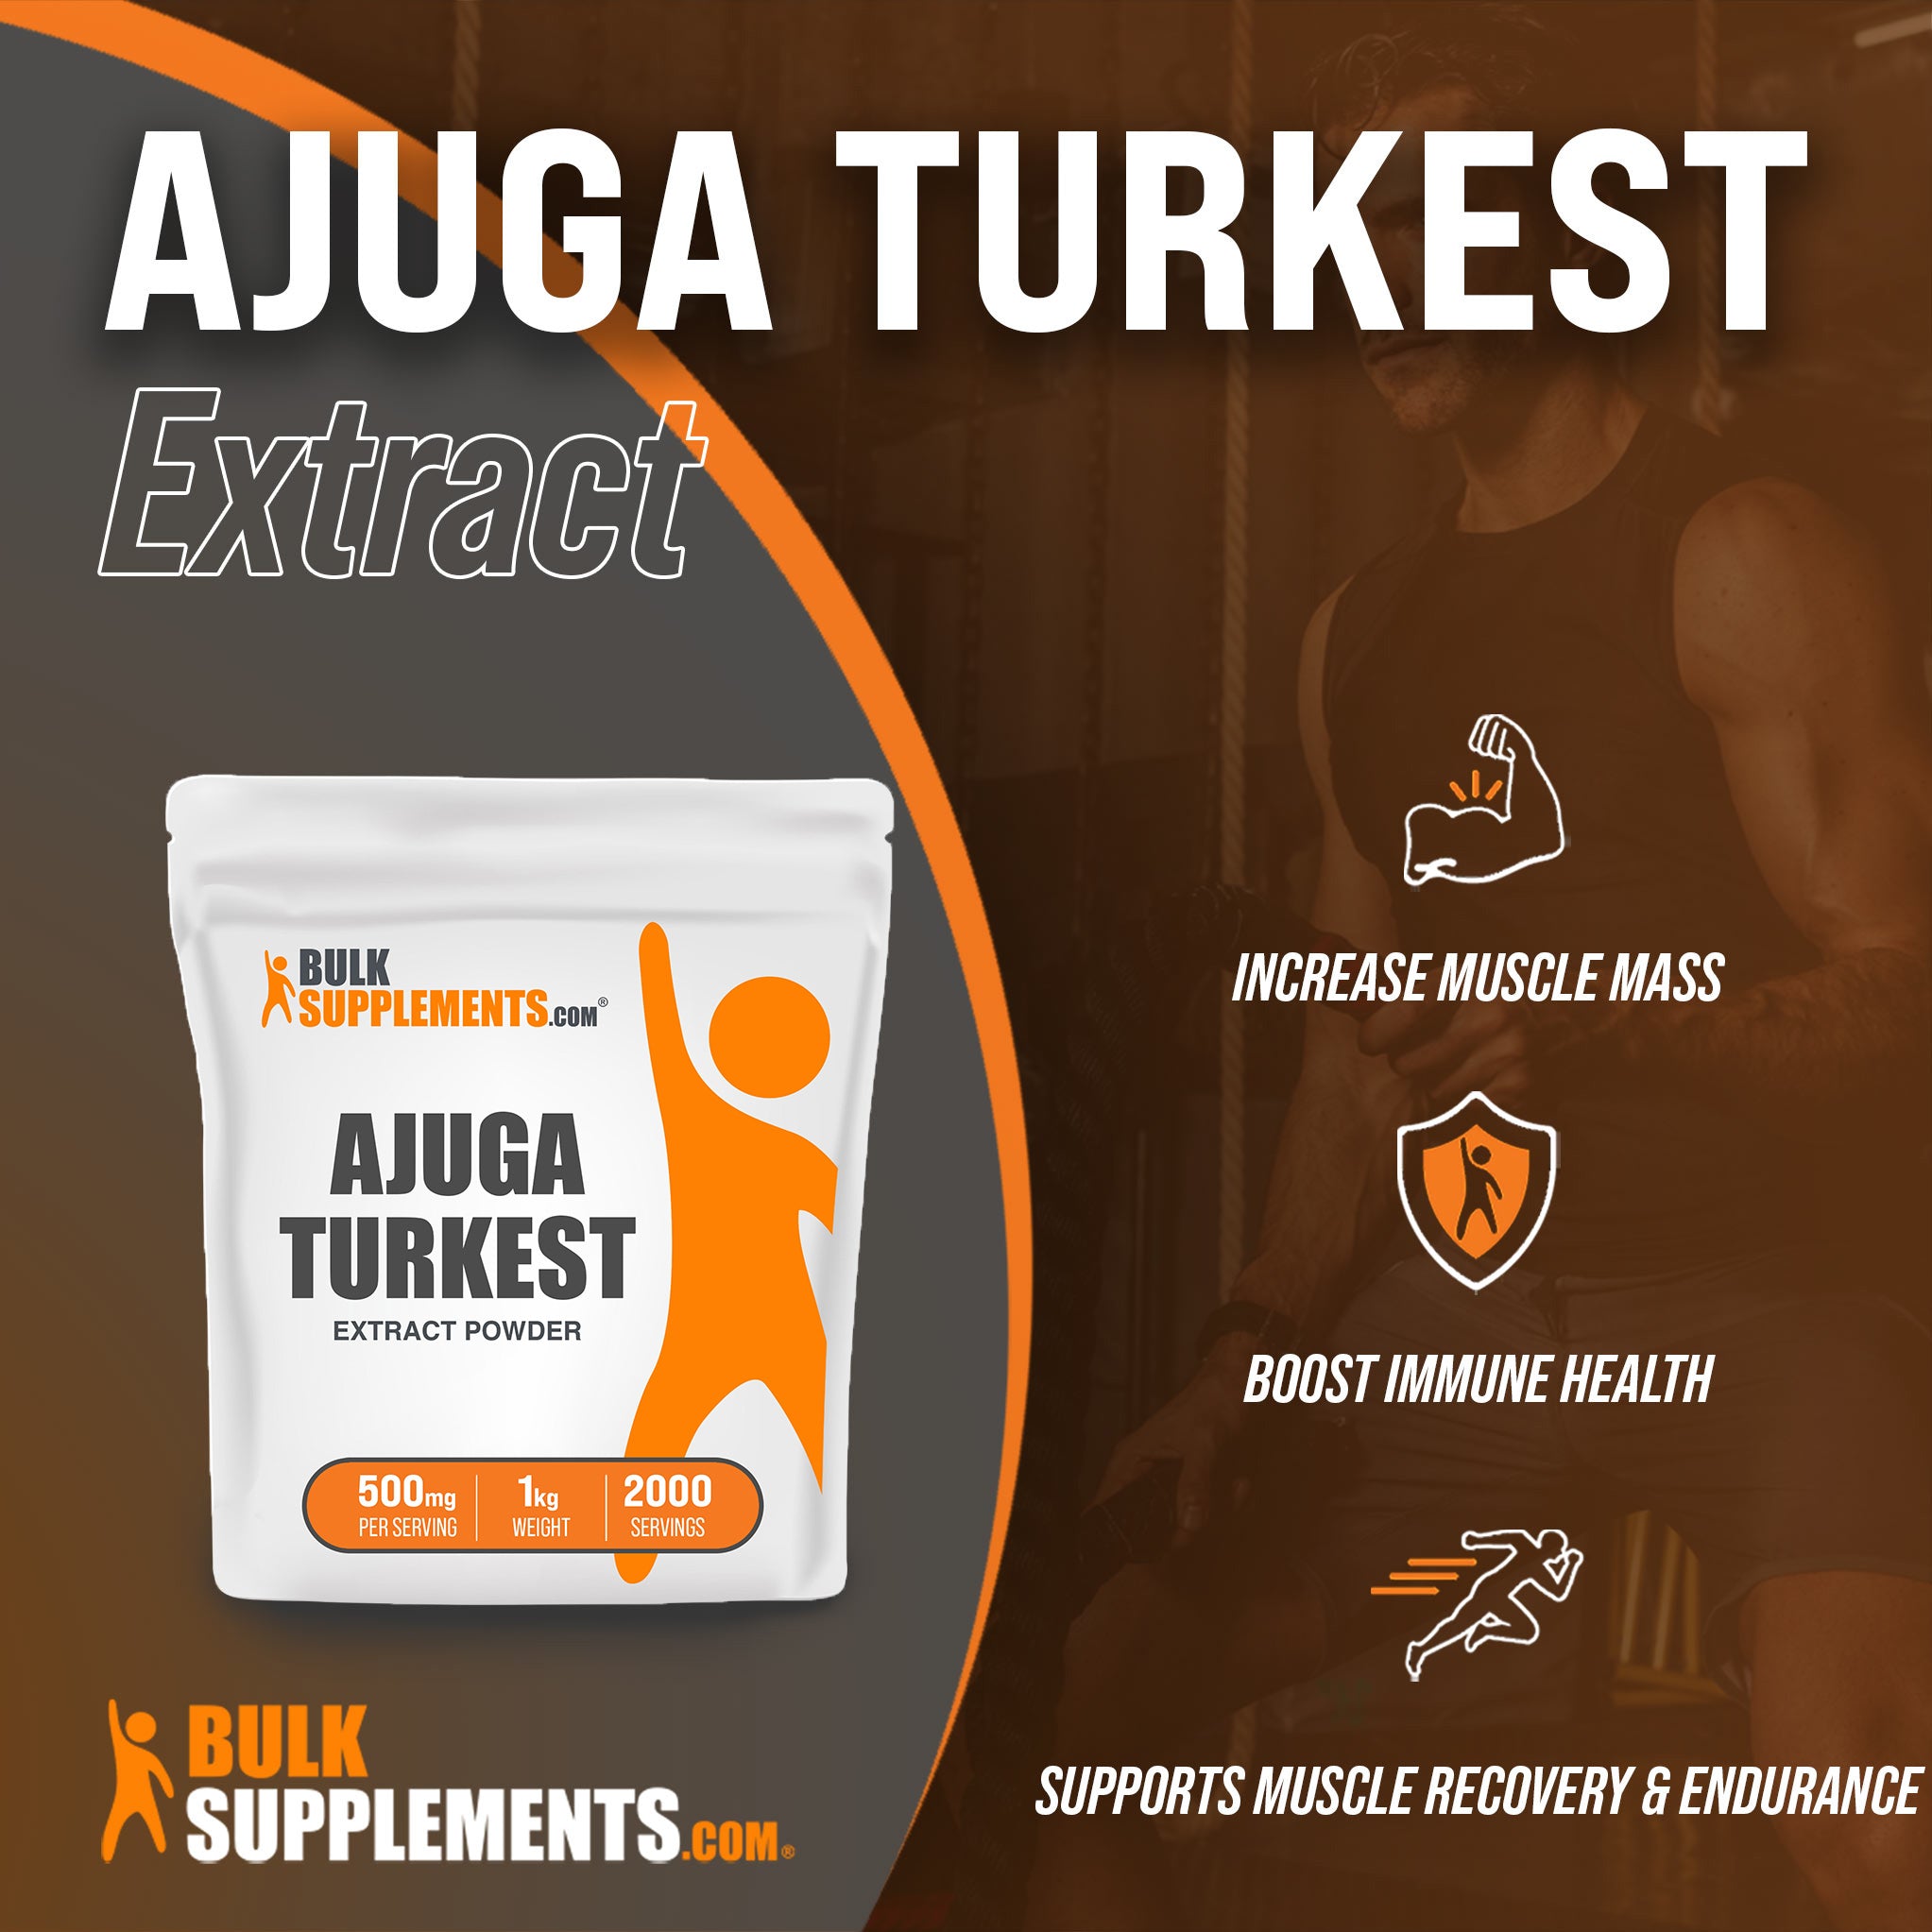 Ajuga Turkest Extract to increase muscle mass and endurance